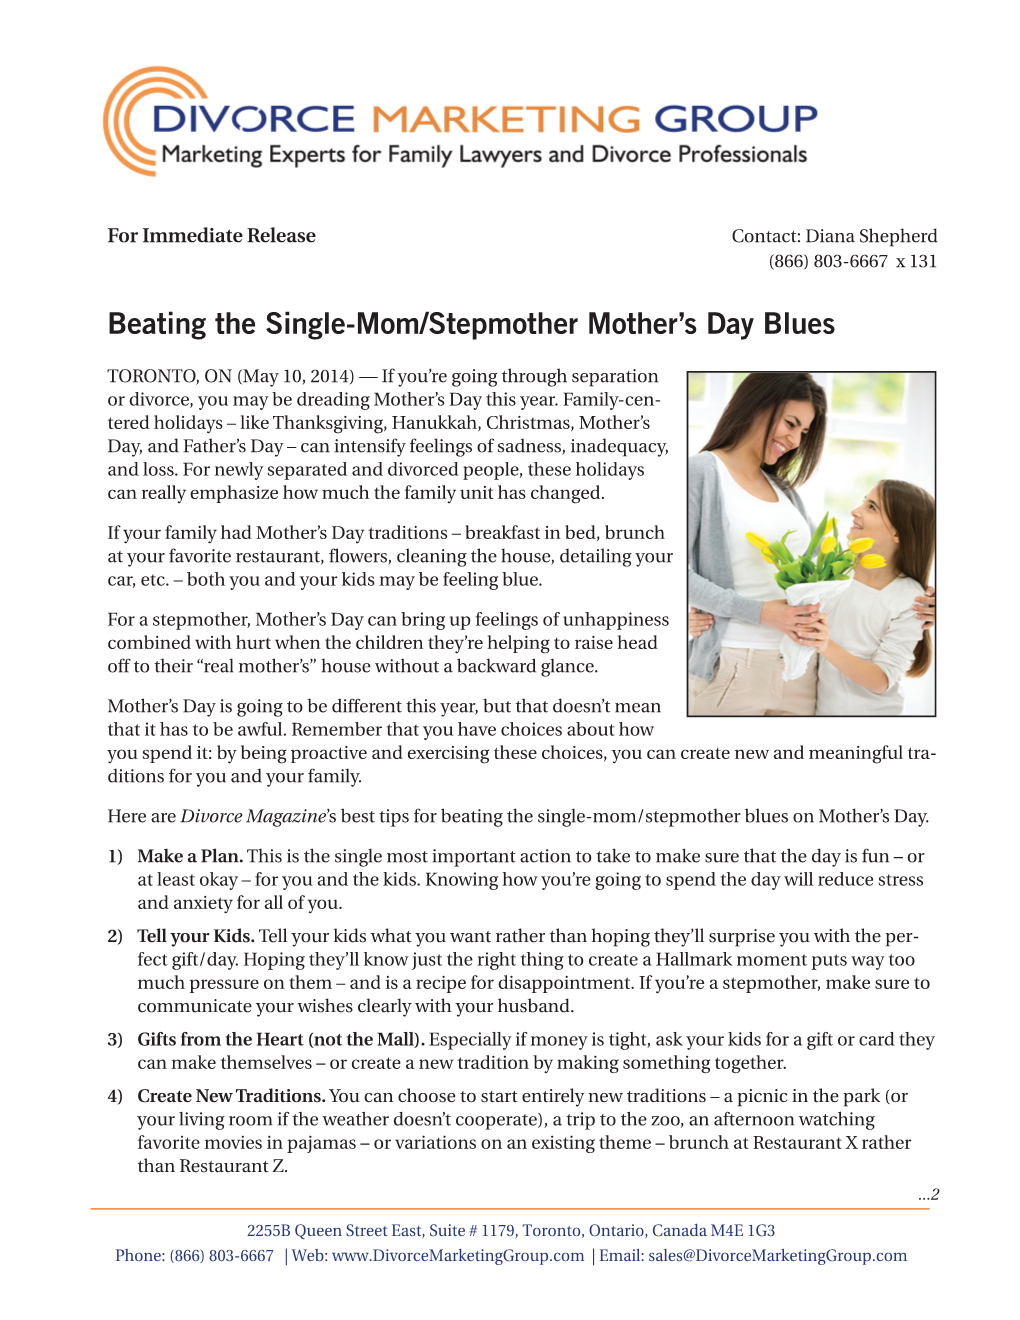 Beating the Single-Mom/Stepmother Mother's Day Blues